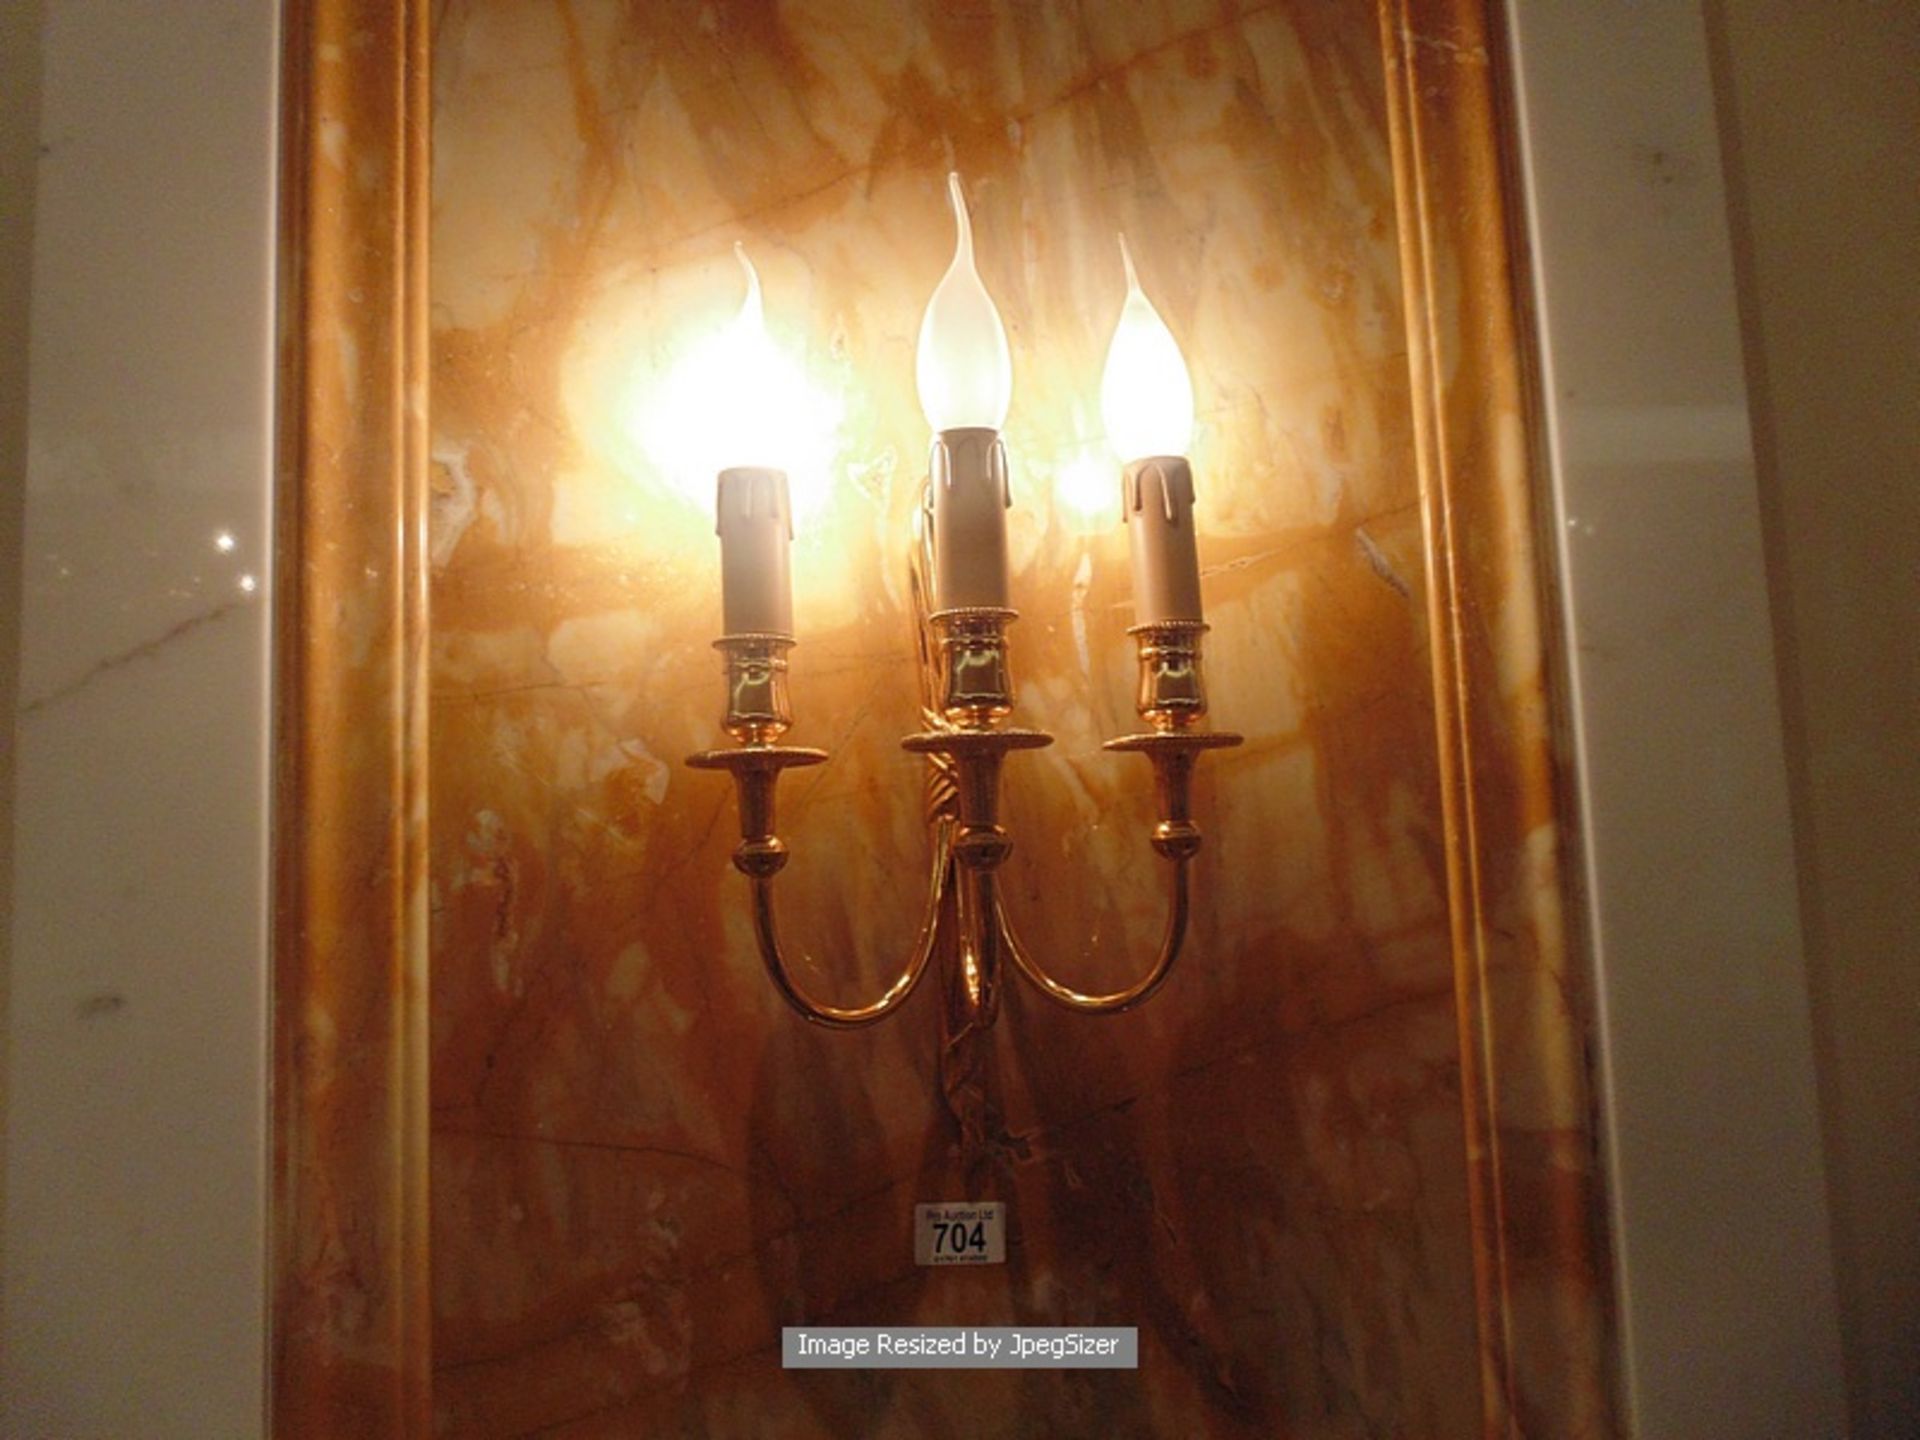 A pair of Laudarte 3 candle wall sconces T.150 pattern wall light, bronze castings gold 24K finish - Image 2 of 2